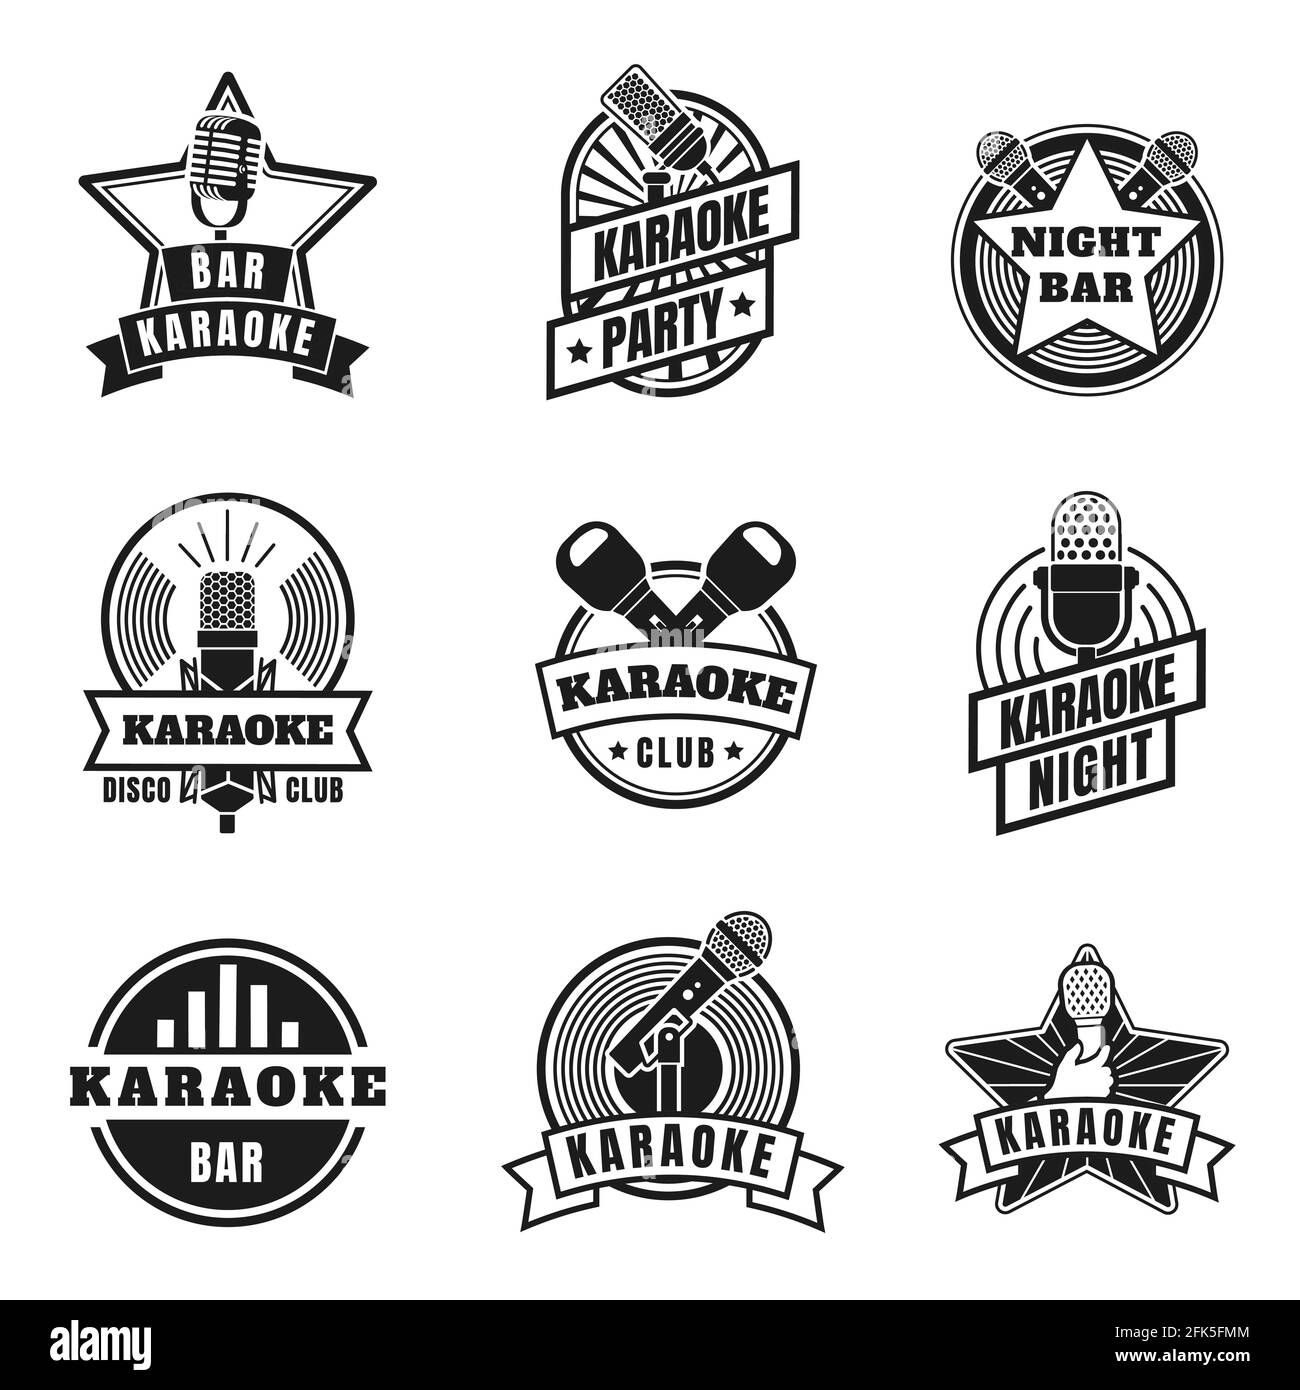 Karaoke emblems. Vintage labels with microphones for music karaoke night party. Retro silhouette singing club badges, mics logo vector set Stock Vector